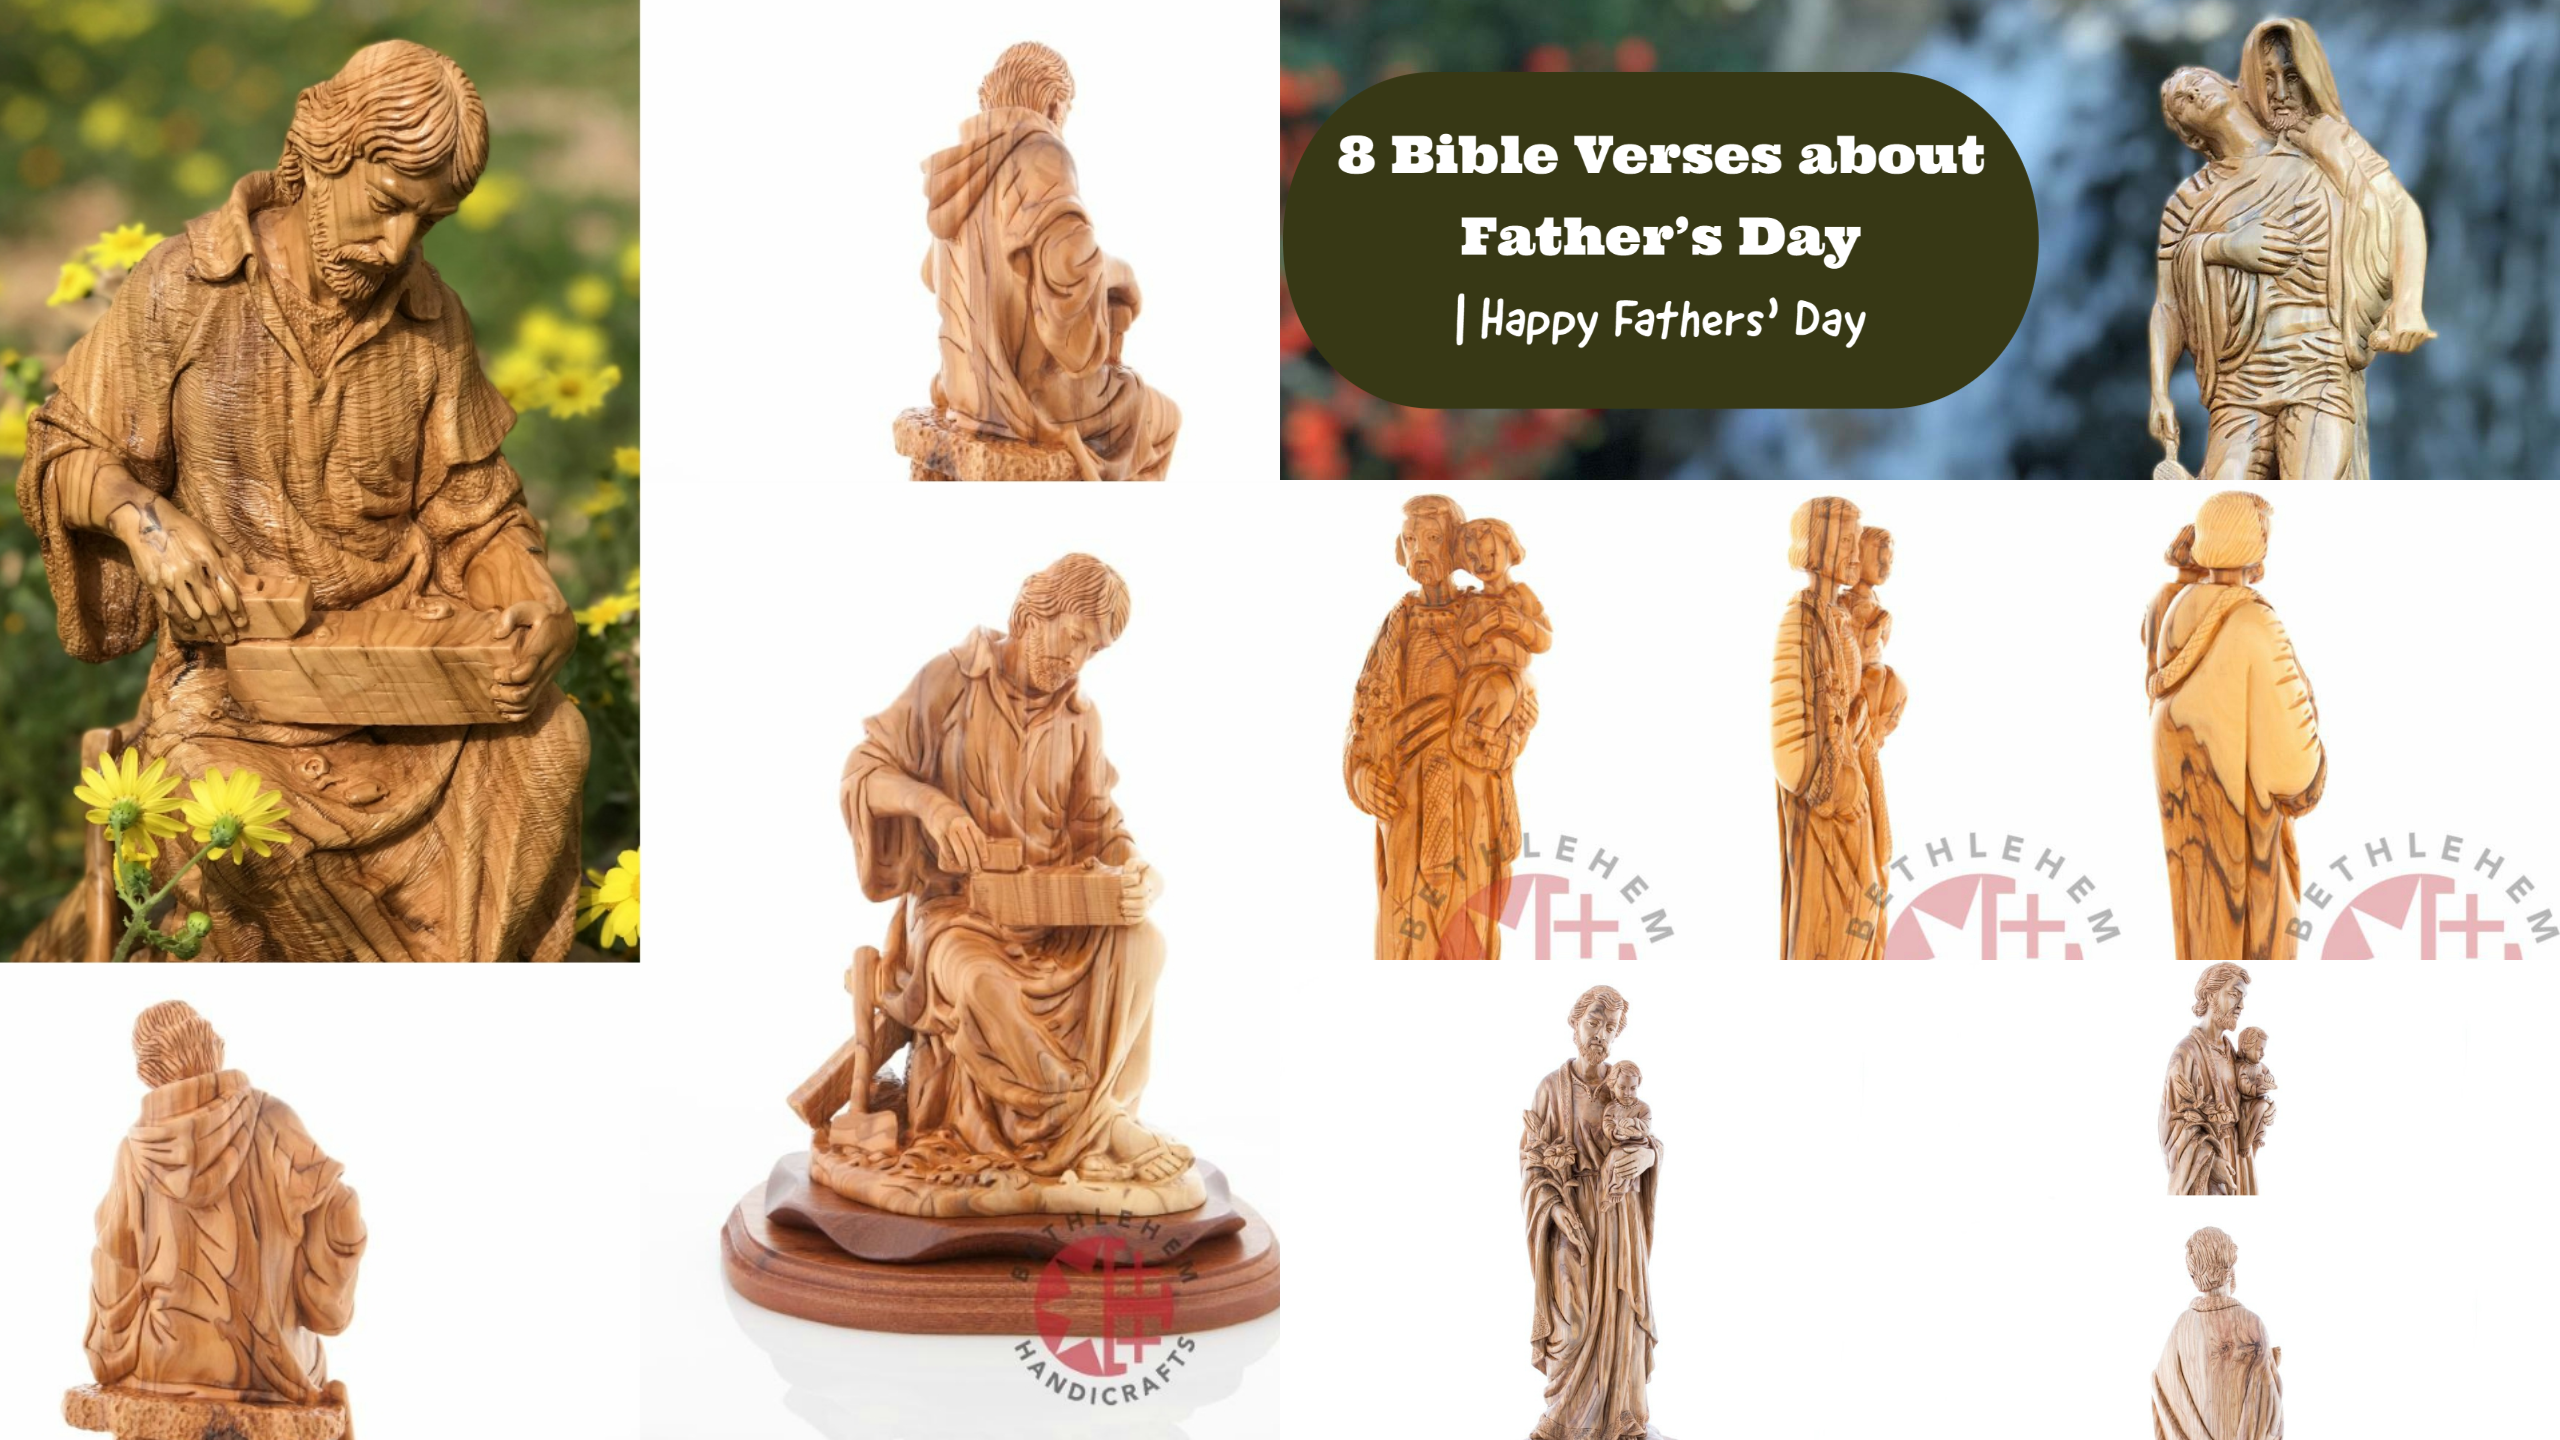 8 Bible Verses about Father's Day | Happy Fathers' Day